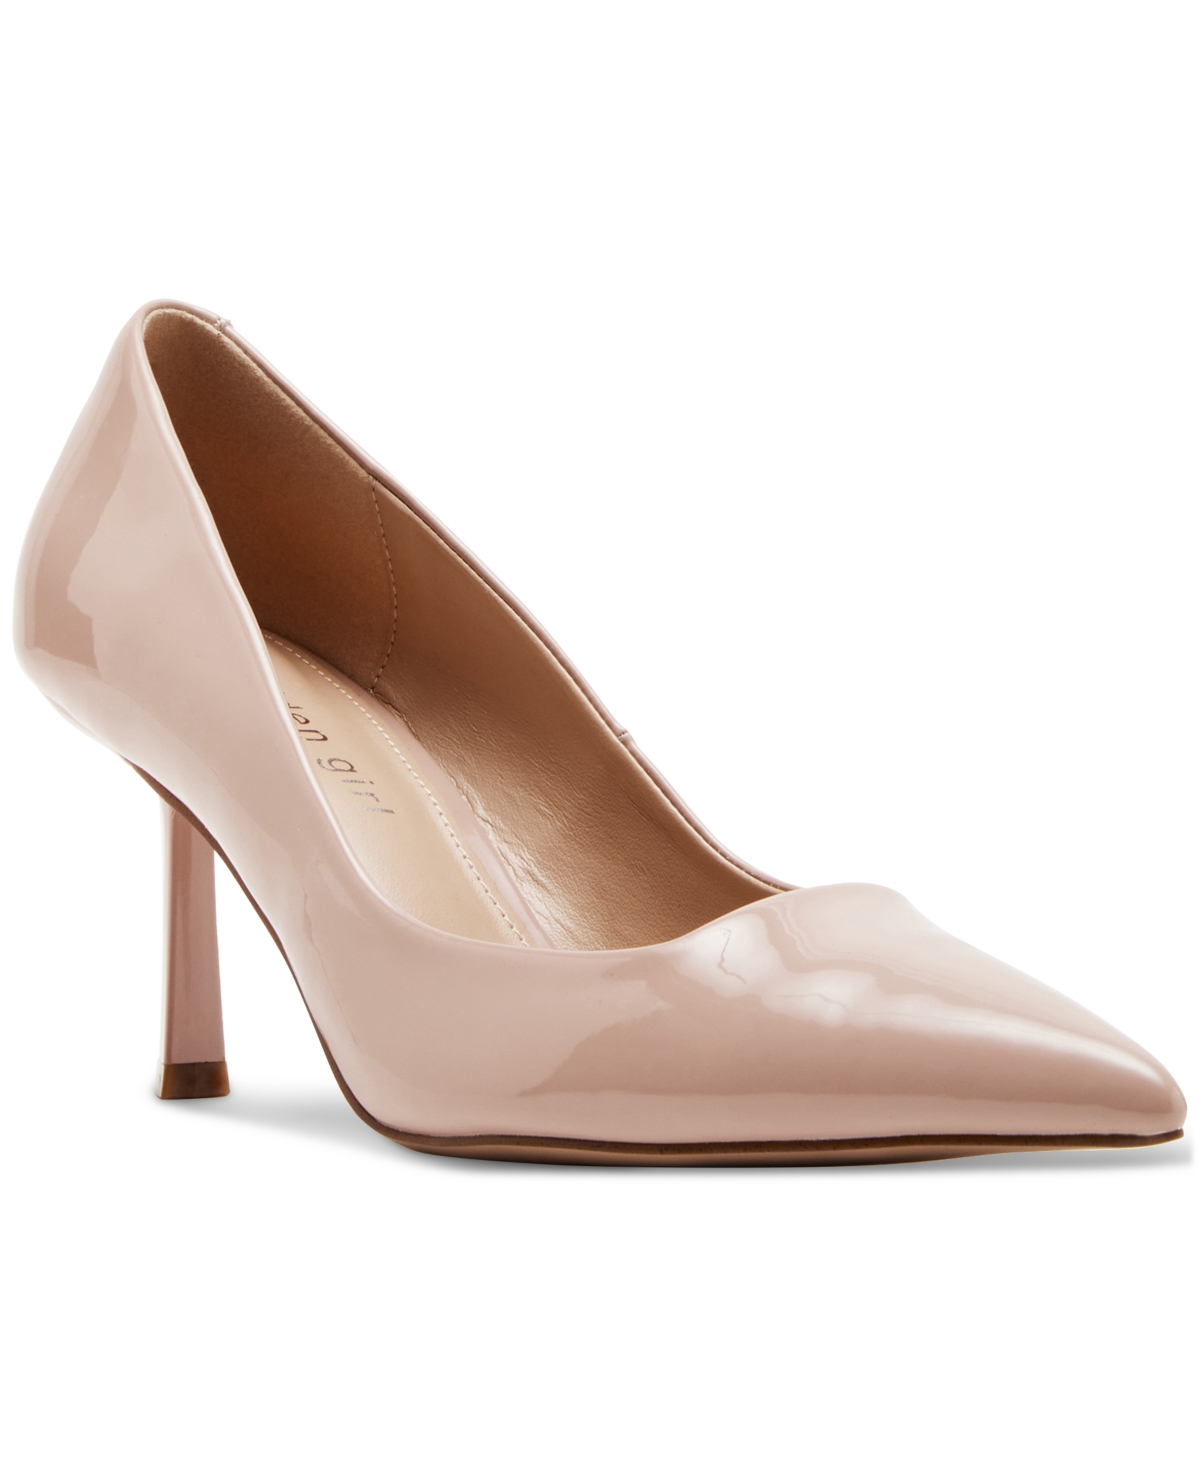 Brynnn Slip-On Pointed-Toe Pumps - Nude Patent